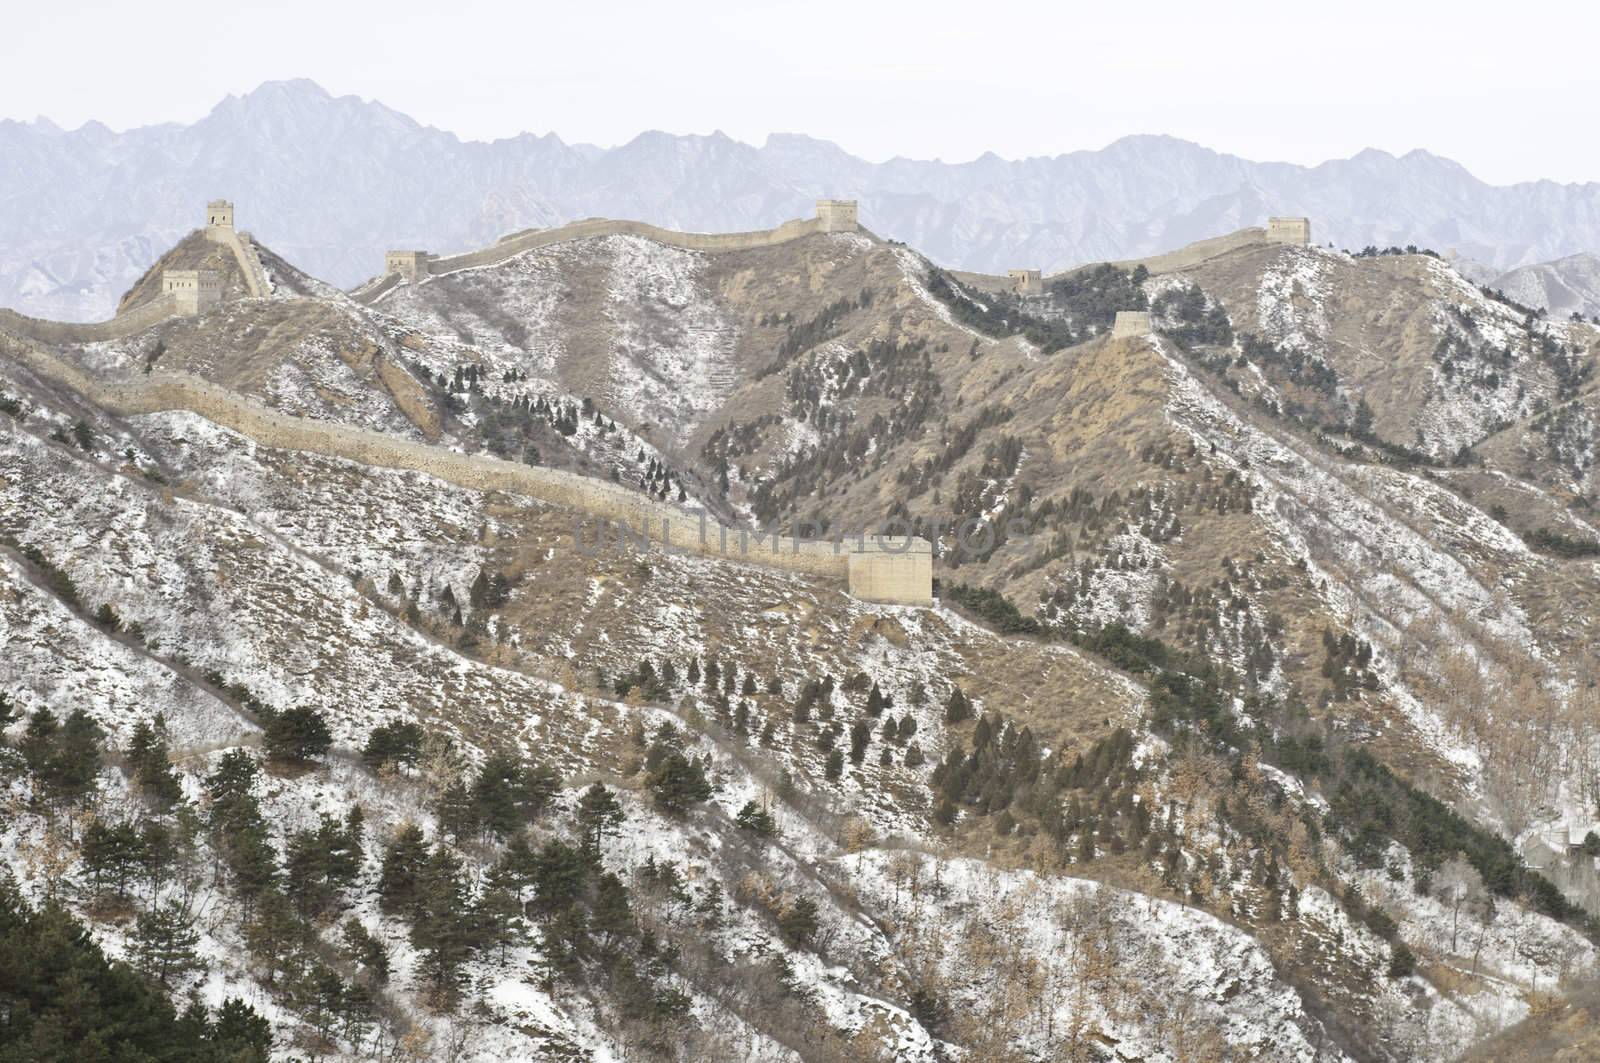 A distant view of the great wall of china during the winter